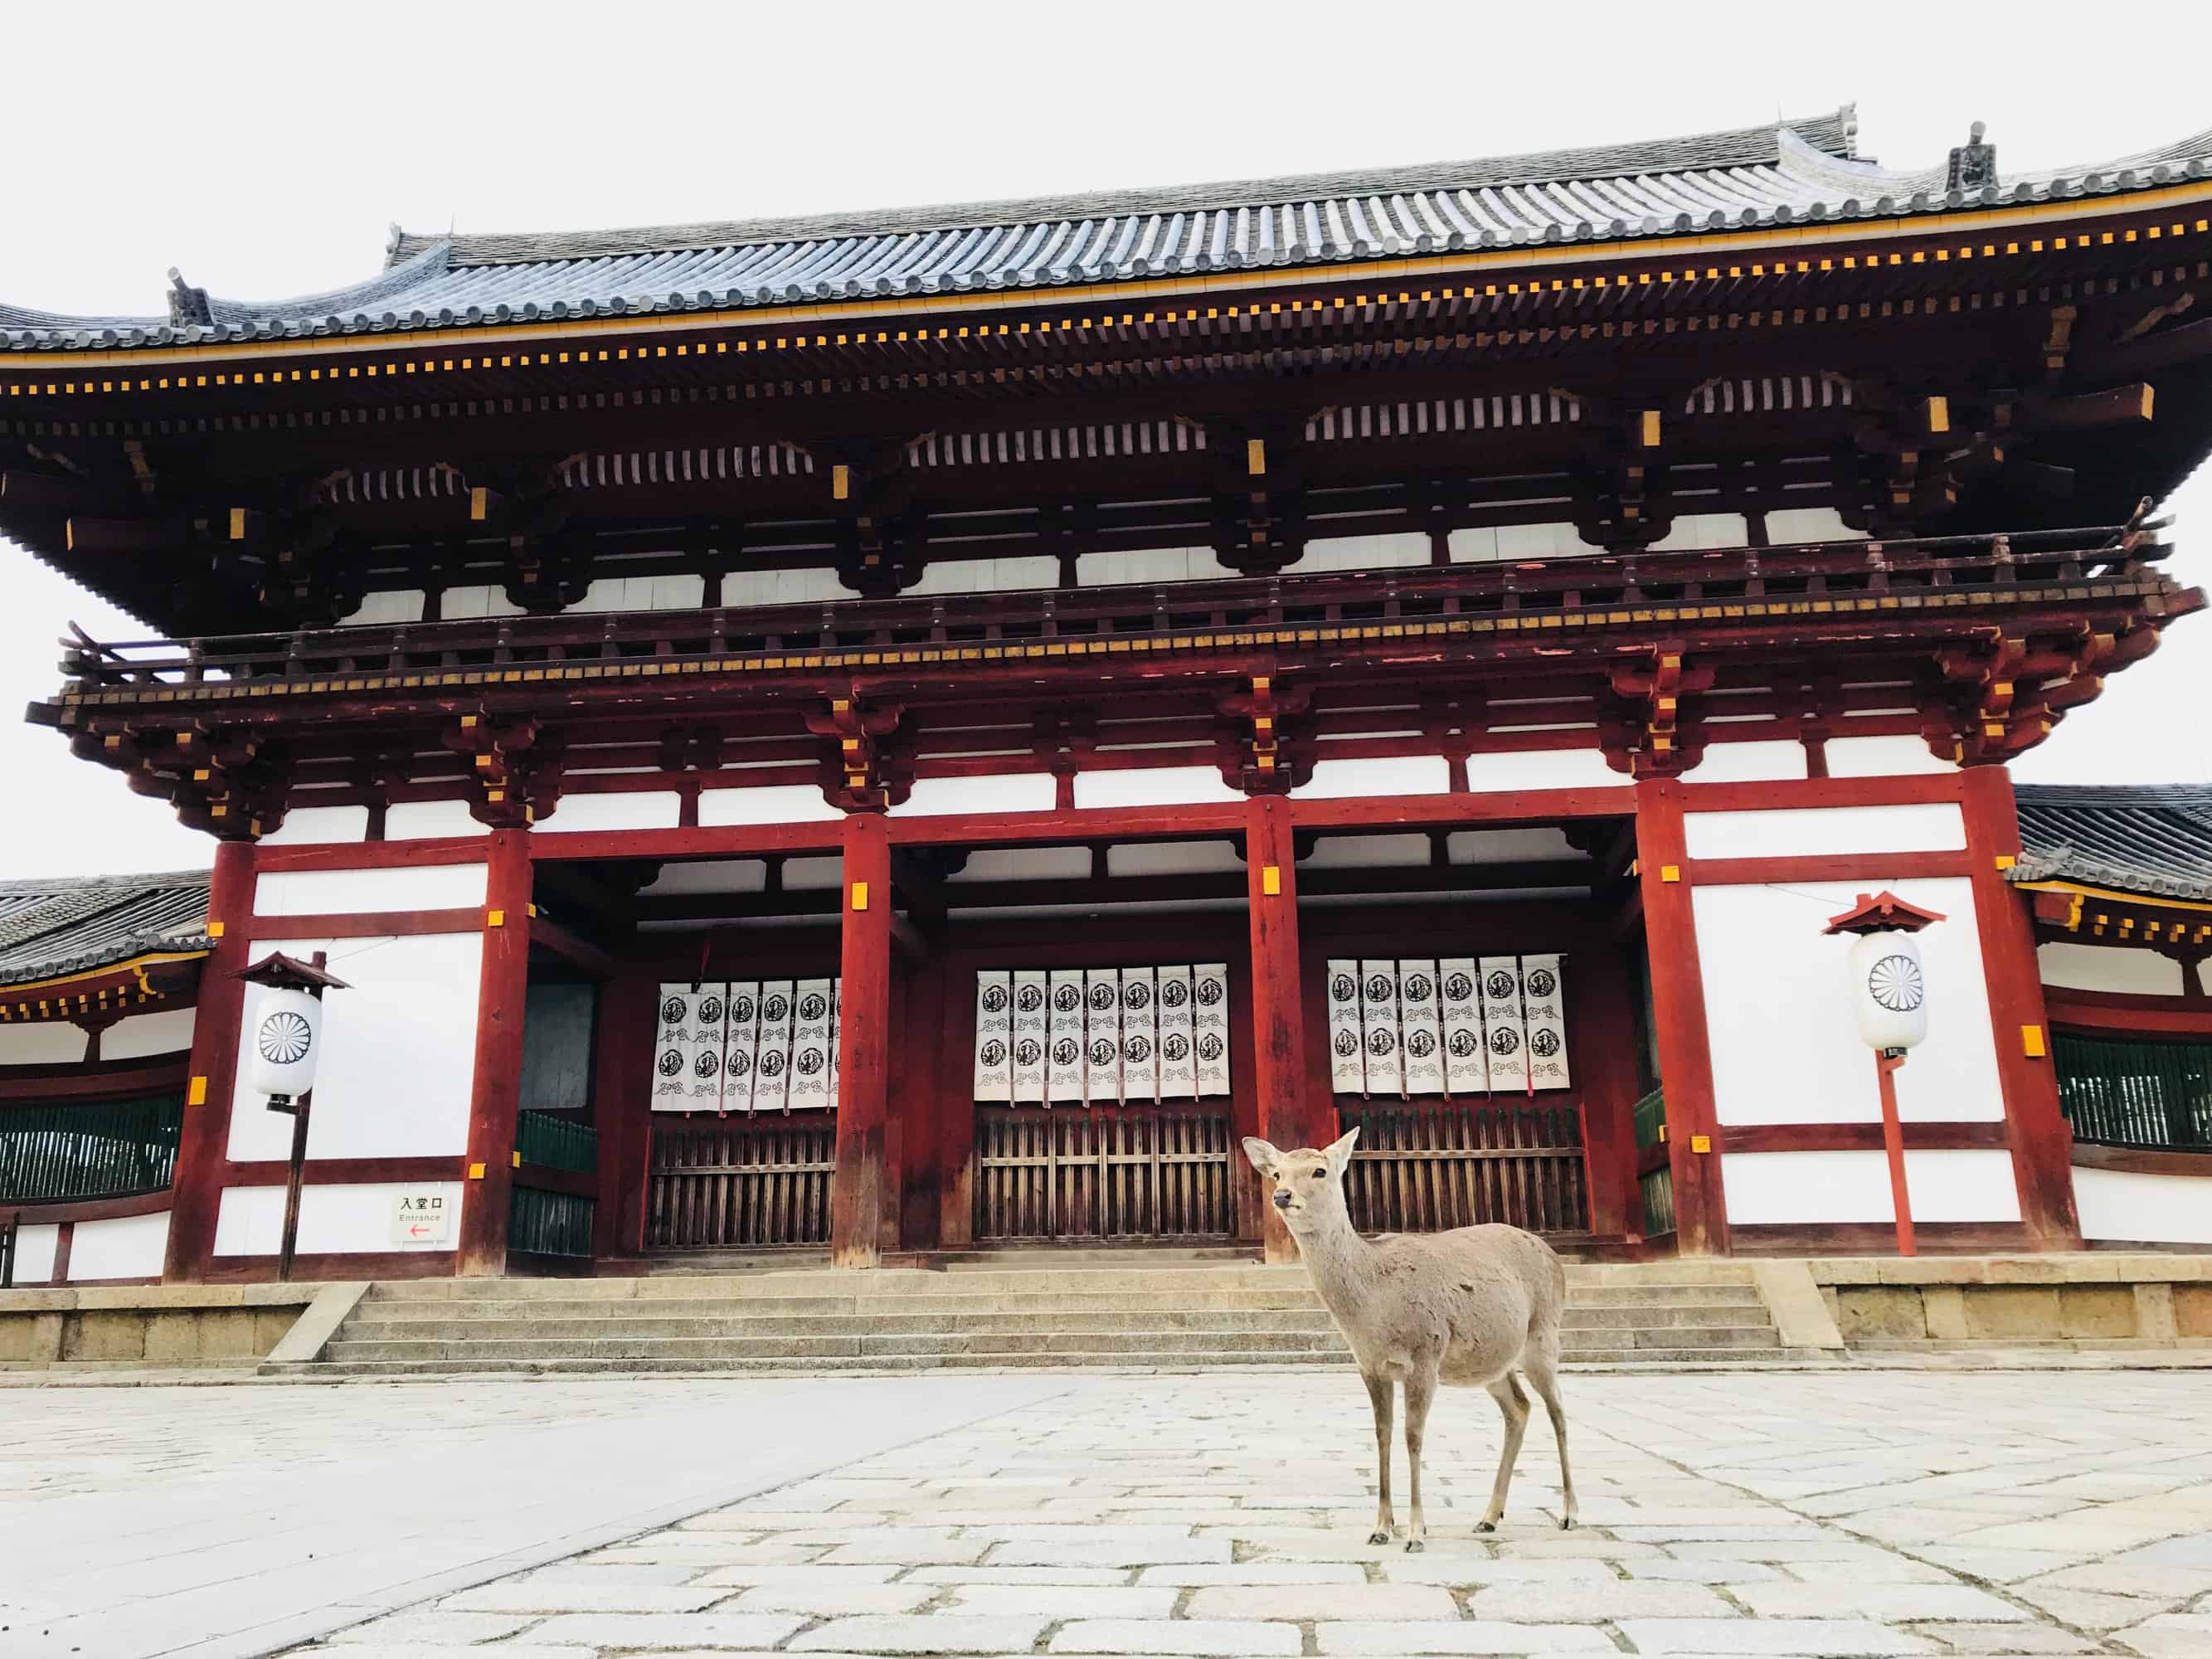 Instagrammable Japan: 4 of Nara’s Most Like-Worthy Attractions